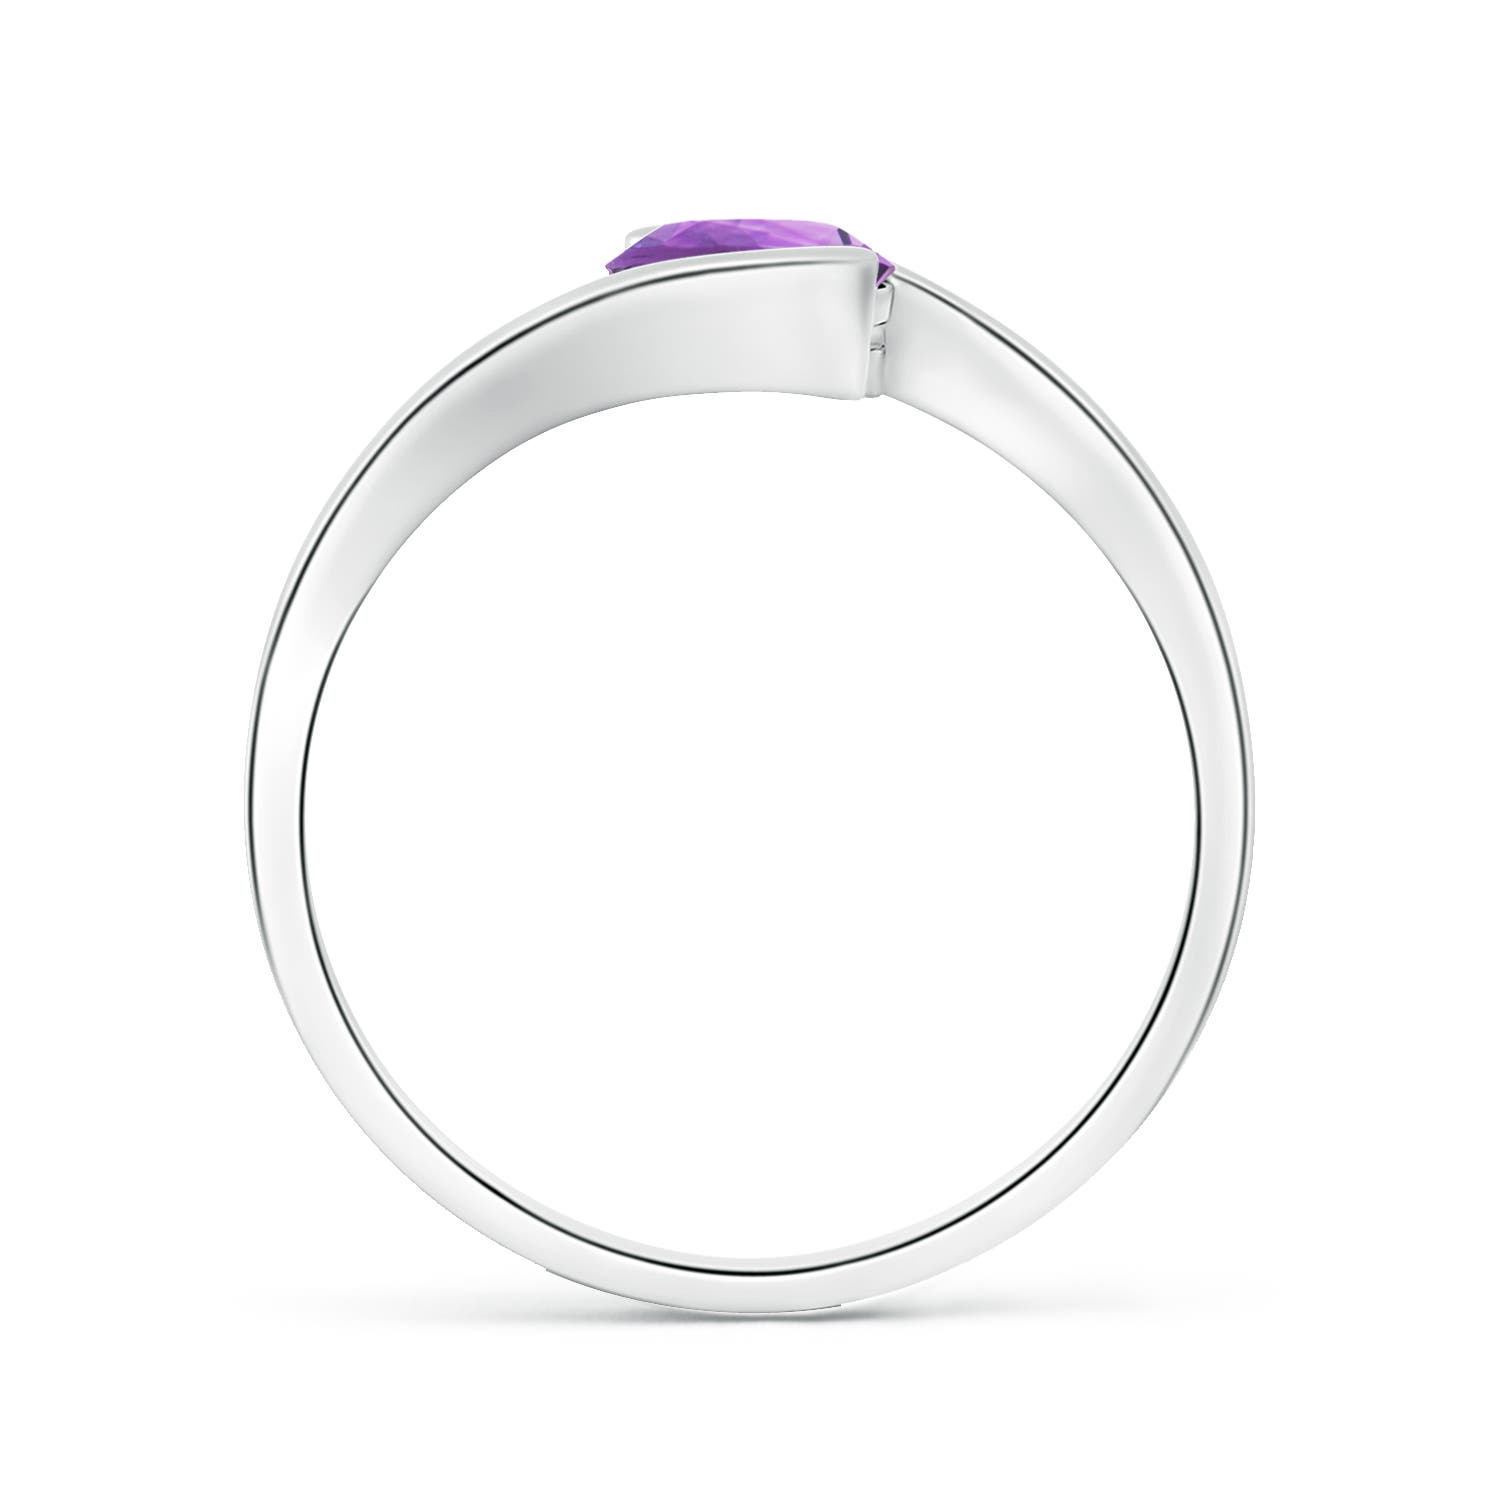 A - Amethyst / 0.8 CT / 14 KT White Gold